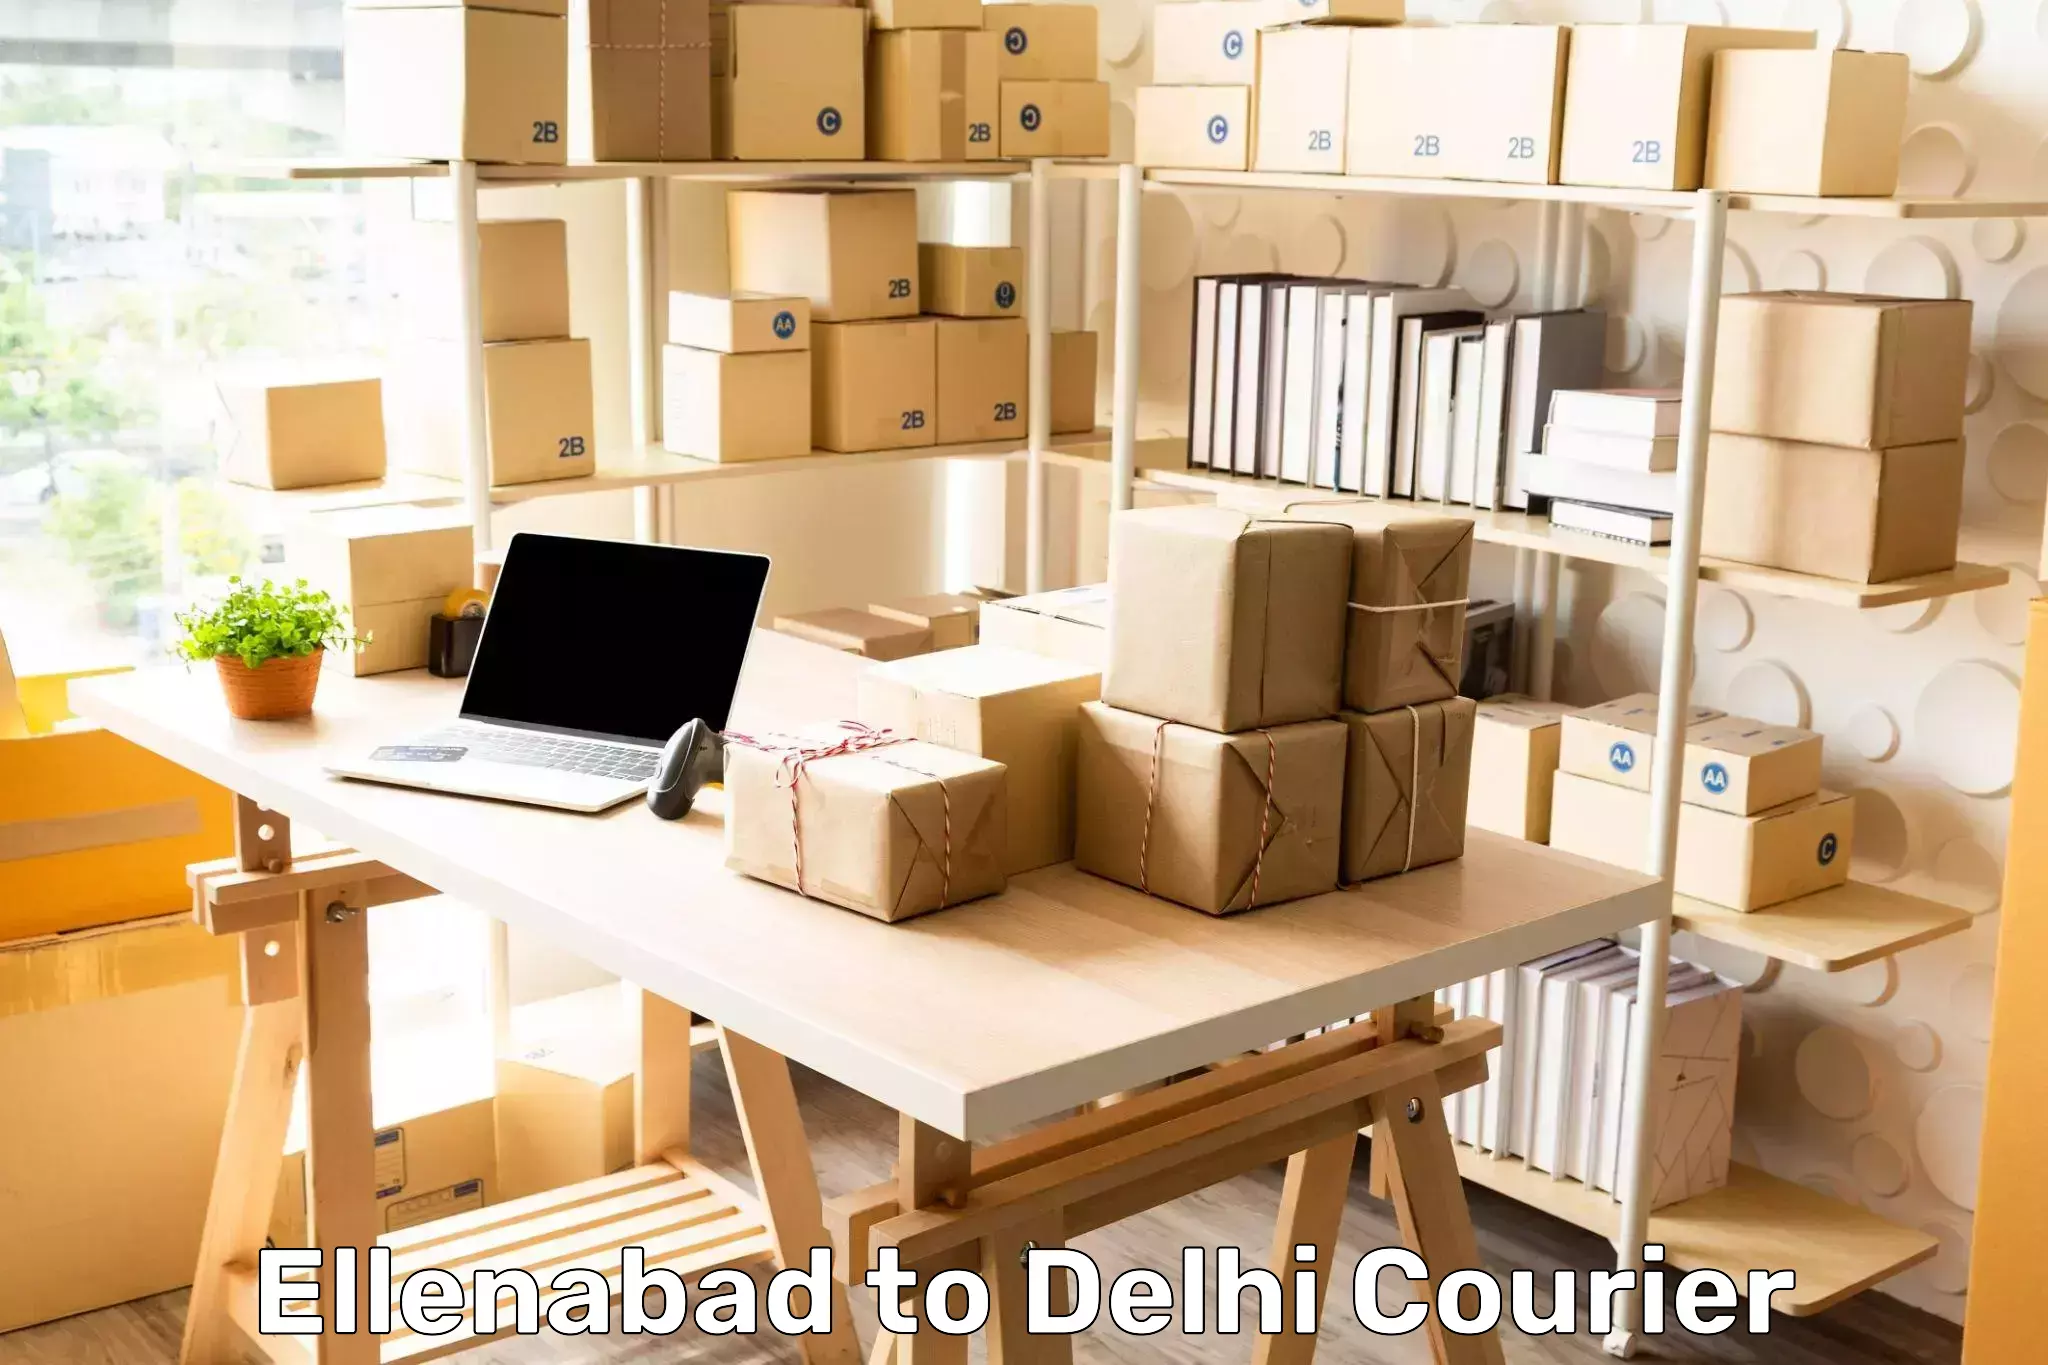 Nationwide shipping capabilities Ellenabad to Indraprastha